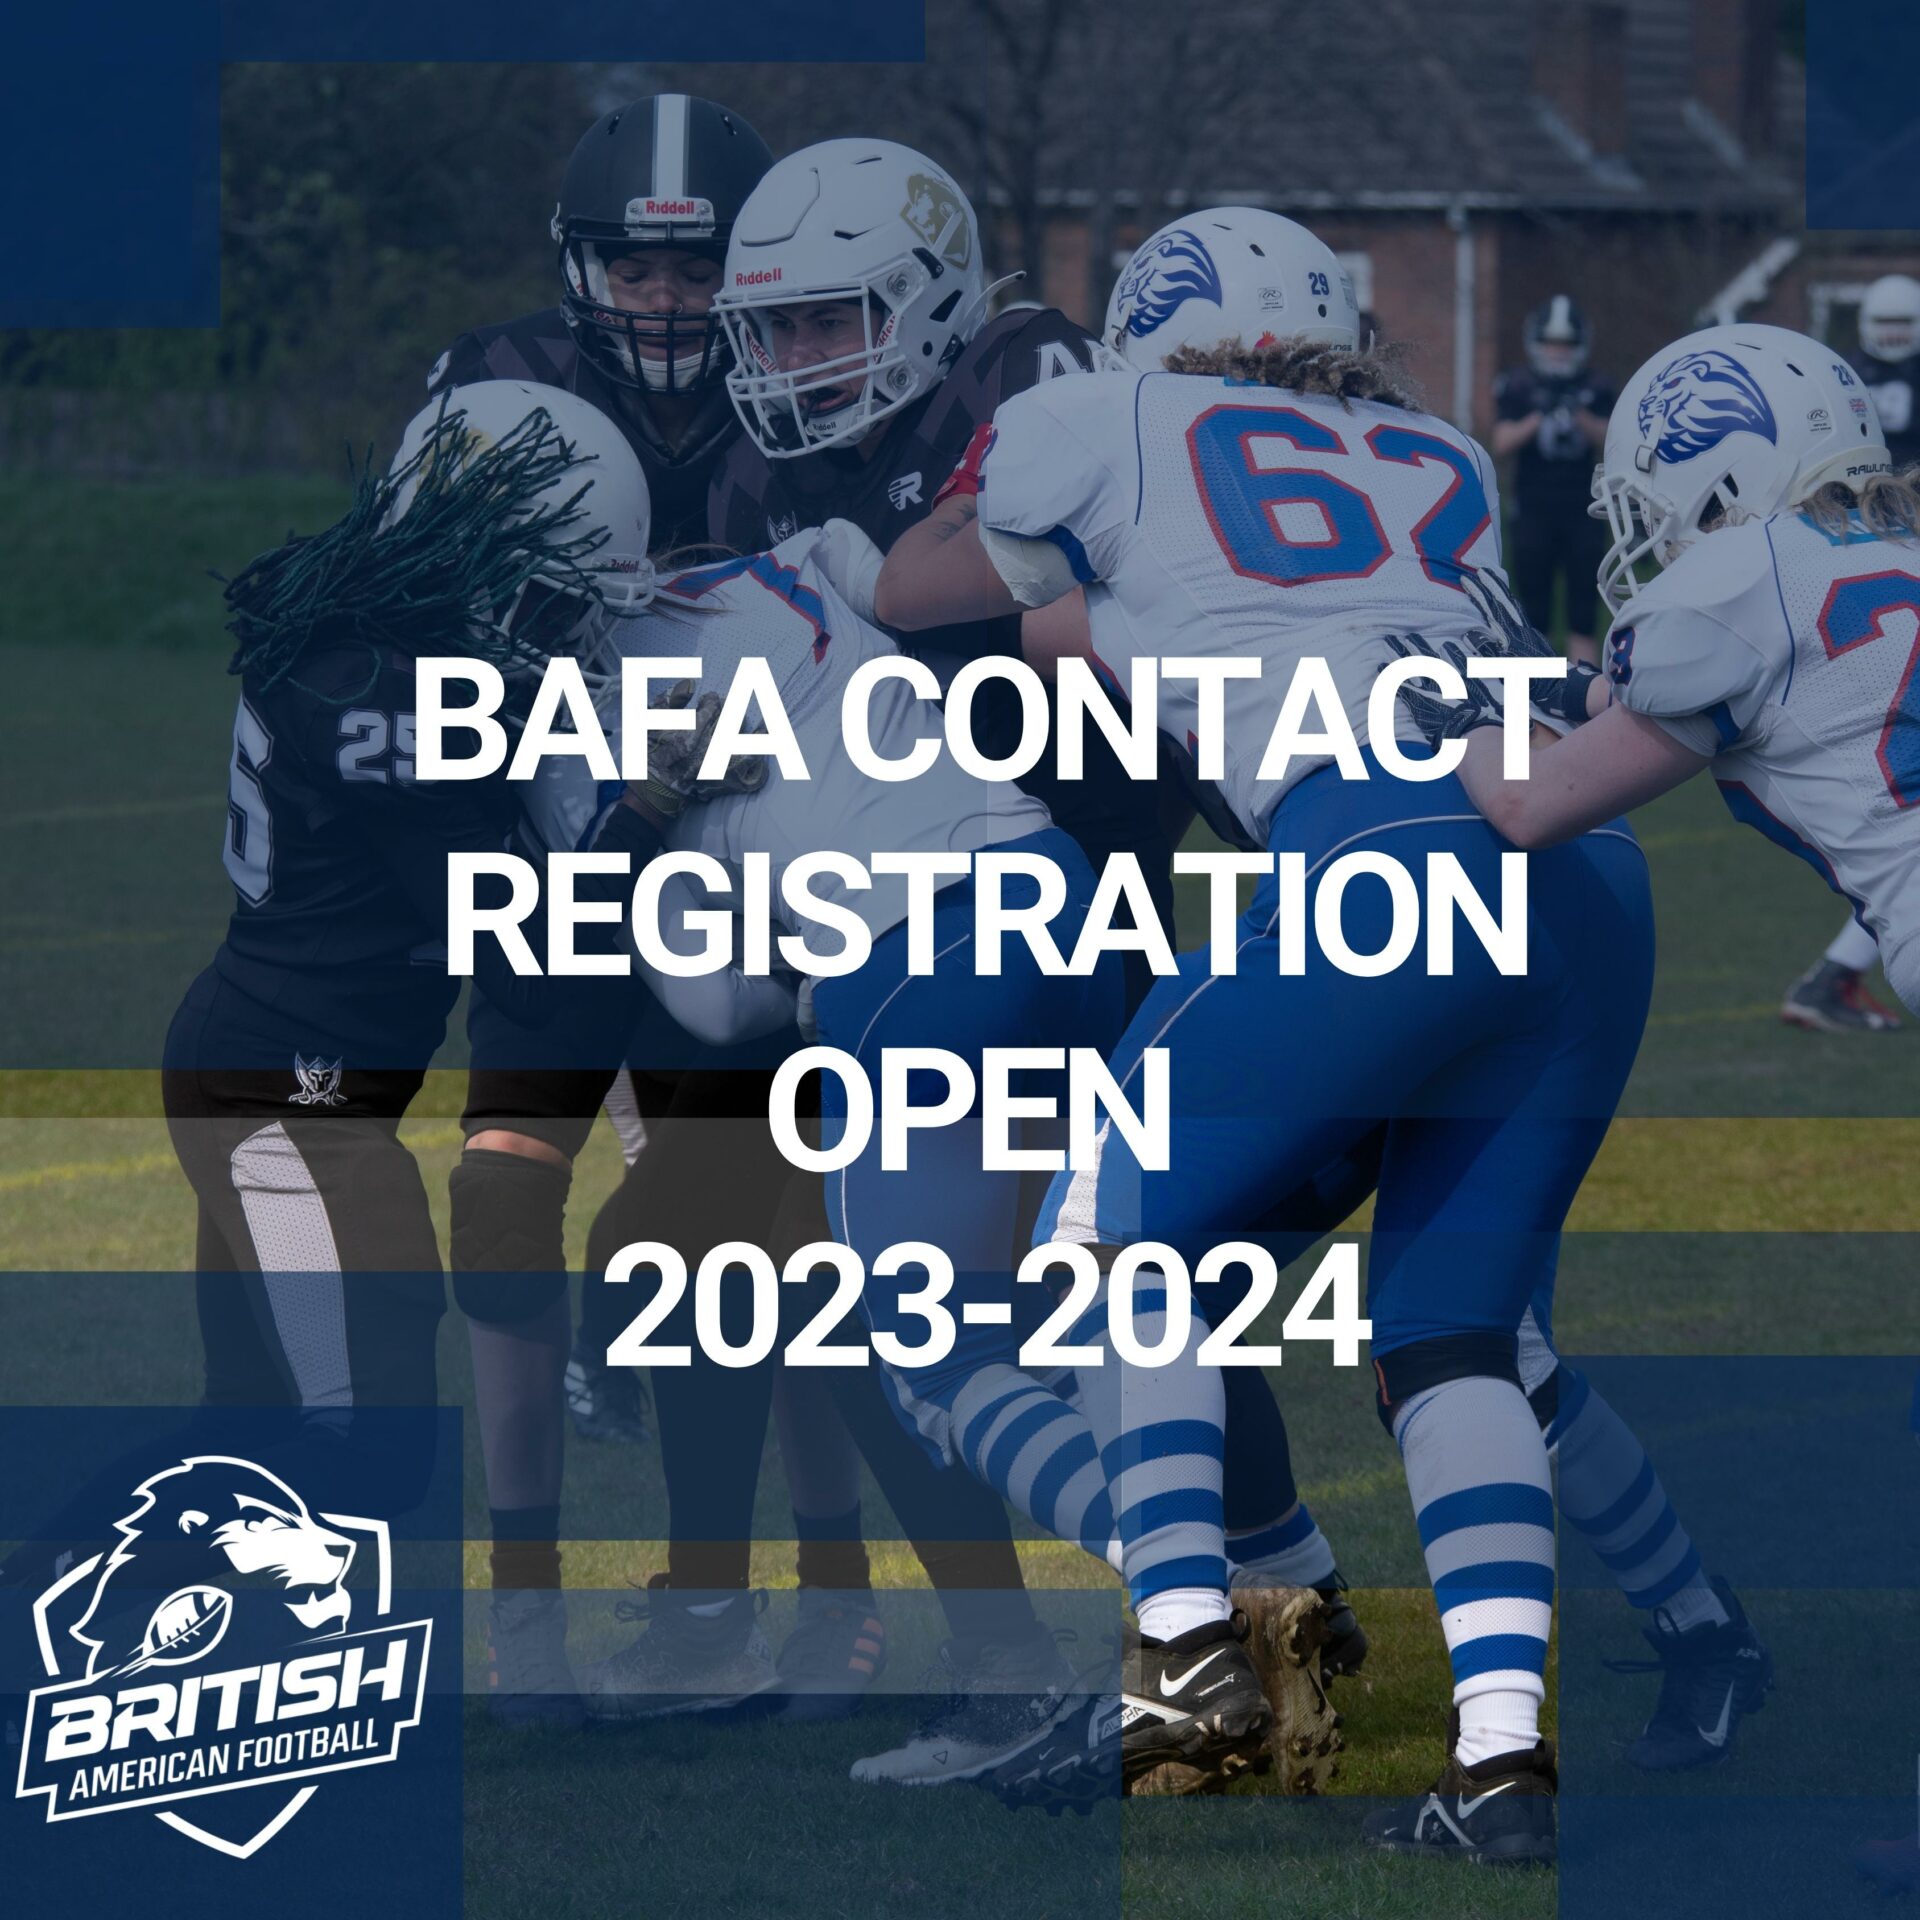 BAFA contact team and member registration now open for 2023-2024 period